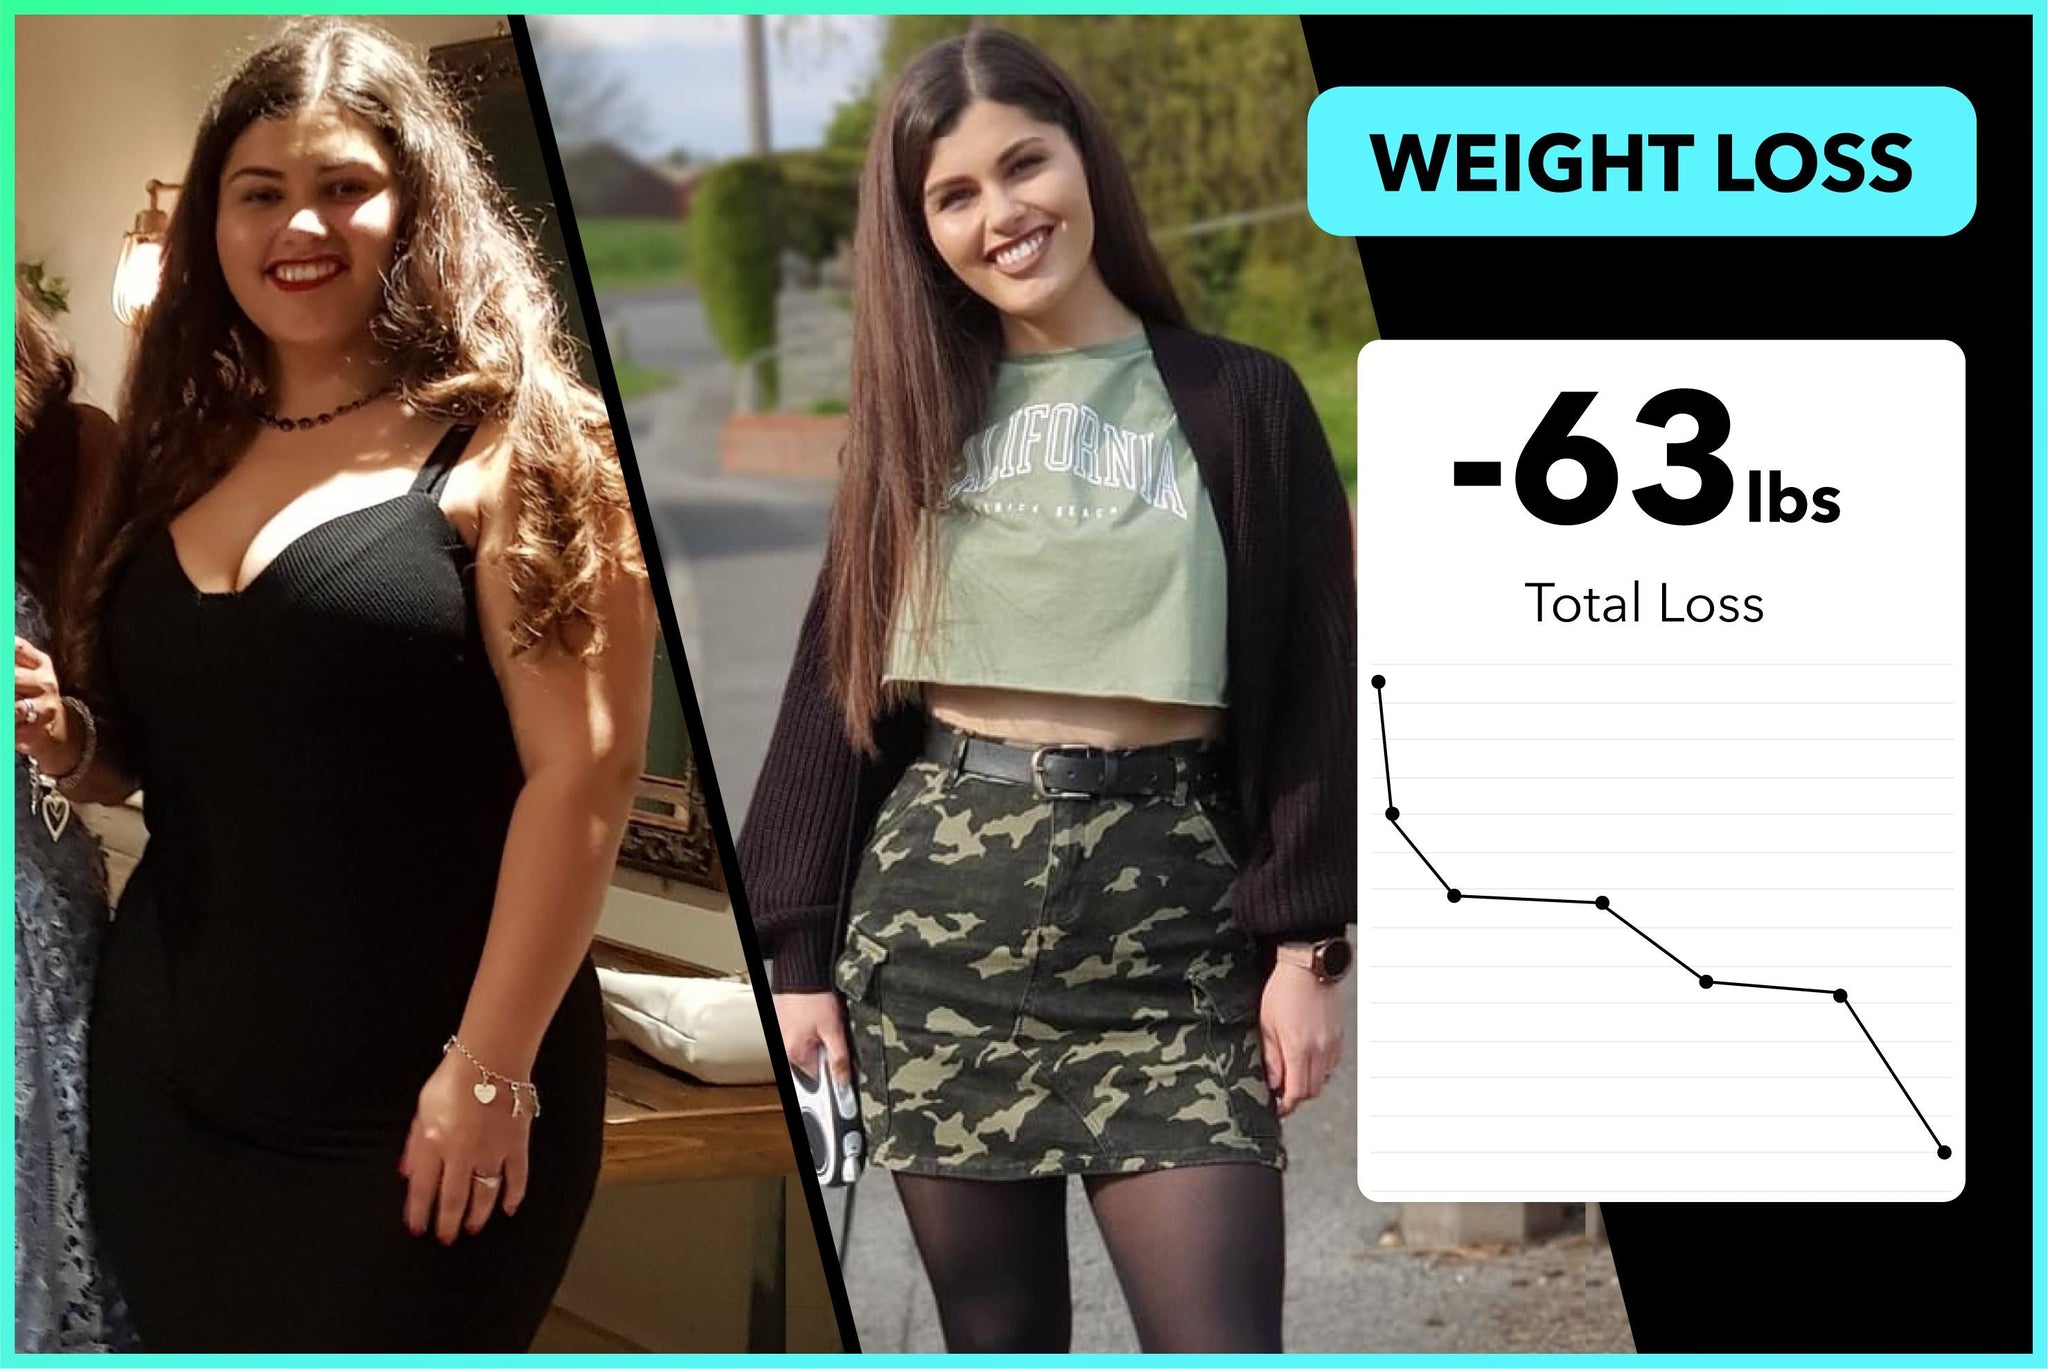 Amber lost 63lbs in 12 months with Team RH!